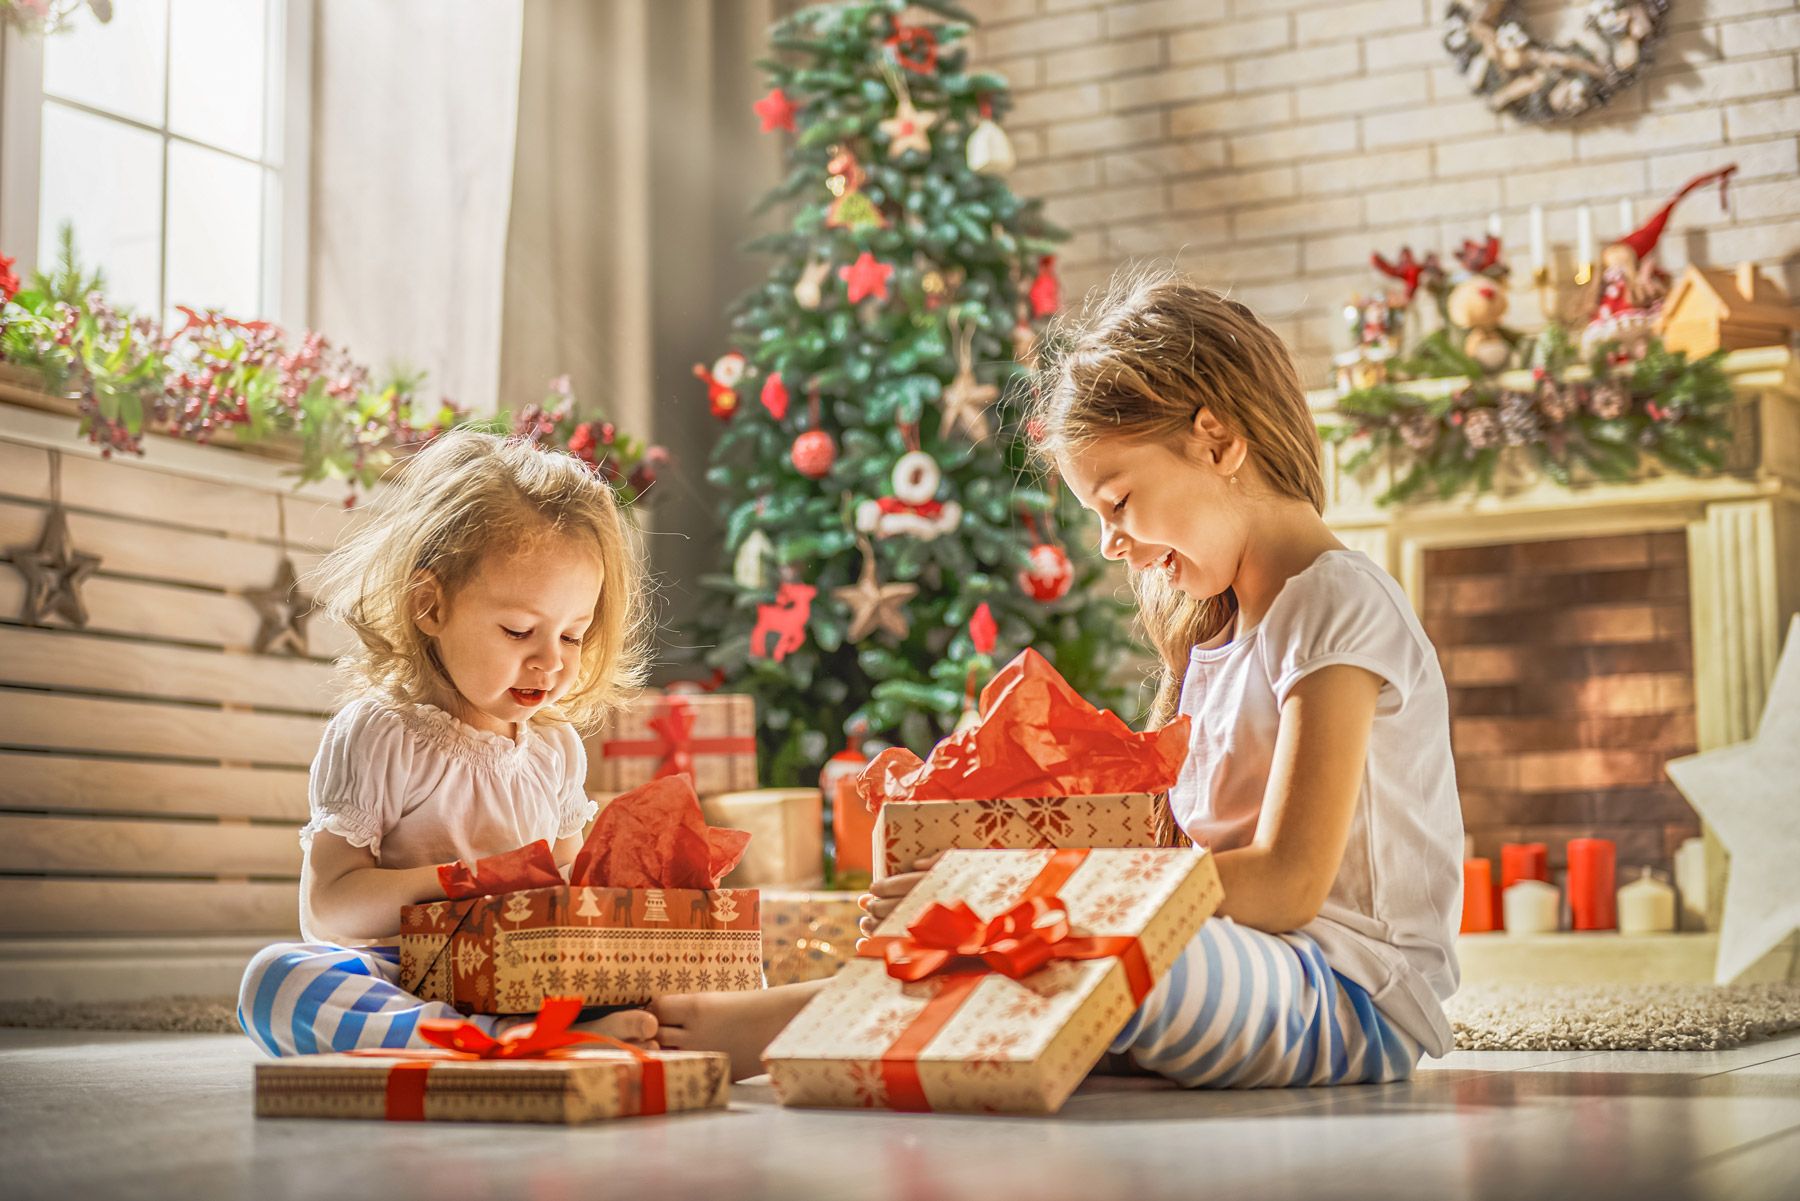 9 Amazing Christmas Vacation Ideas For Families | Beaches